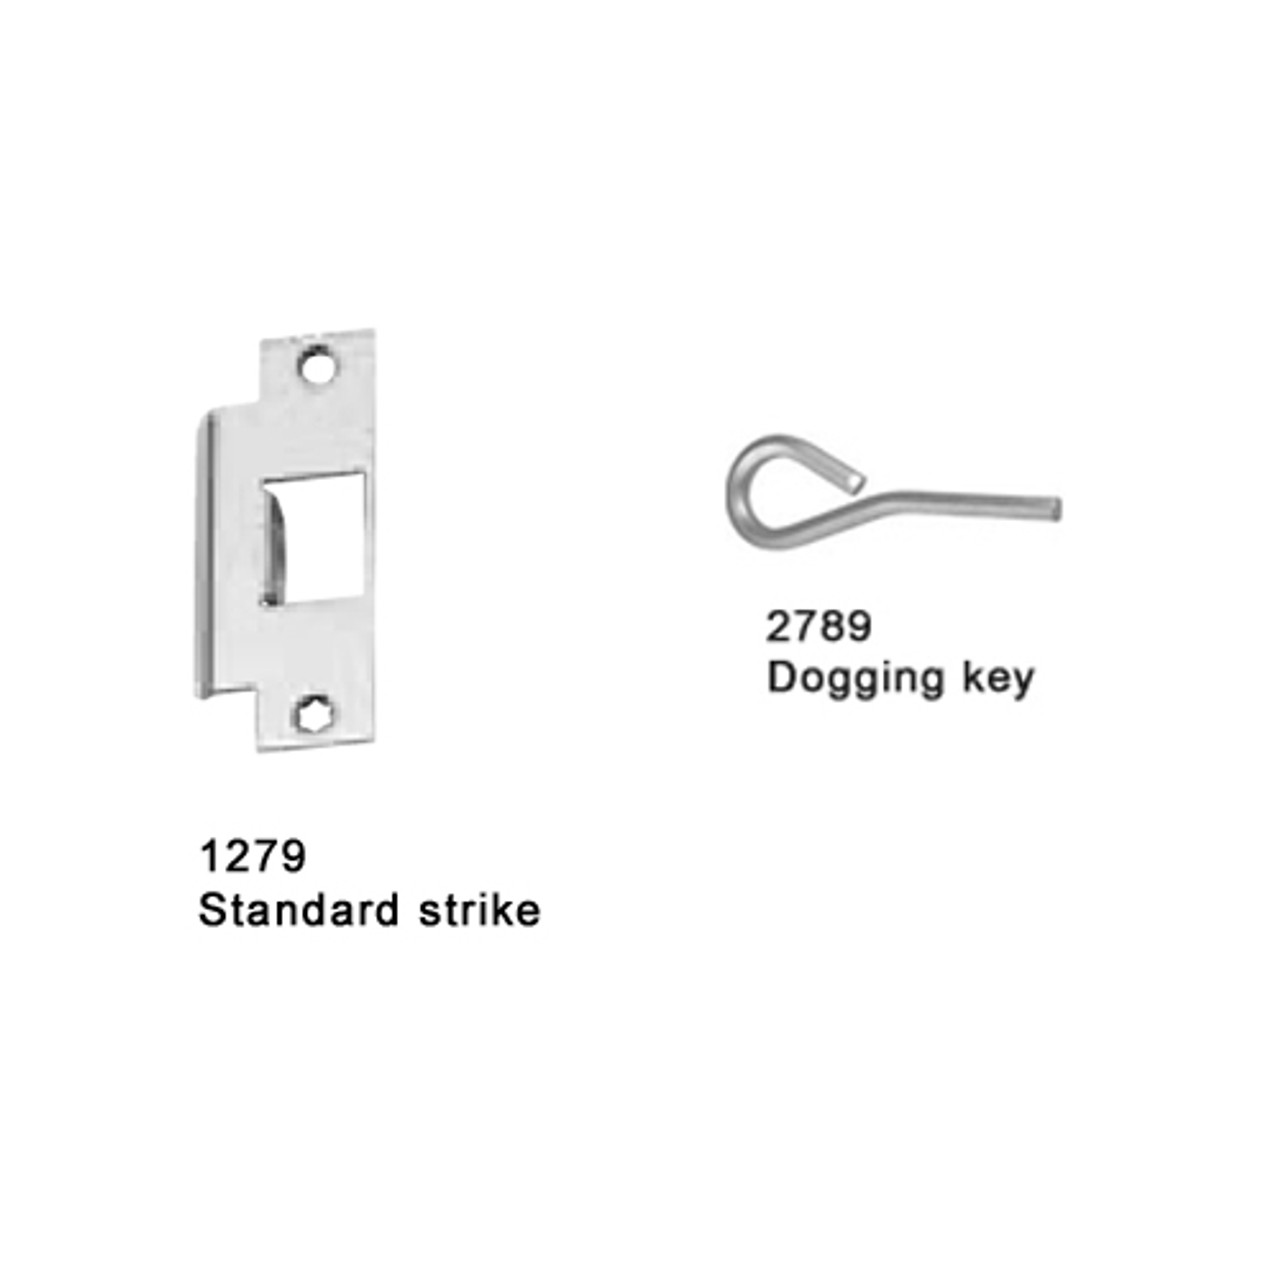 25-M-NL-US26-4-RHR Falcon 25 Series Mortise Lock Devices with 512NL Night Latch Trim in Polished Chrome